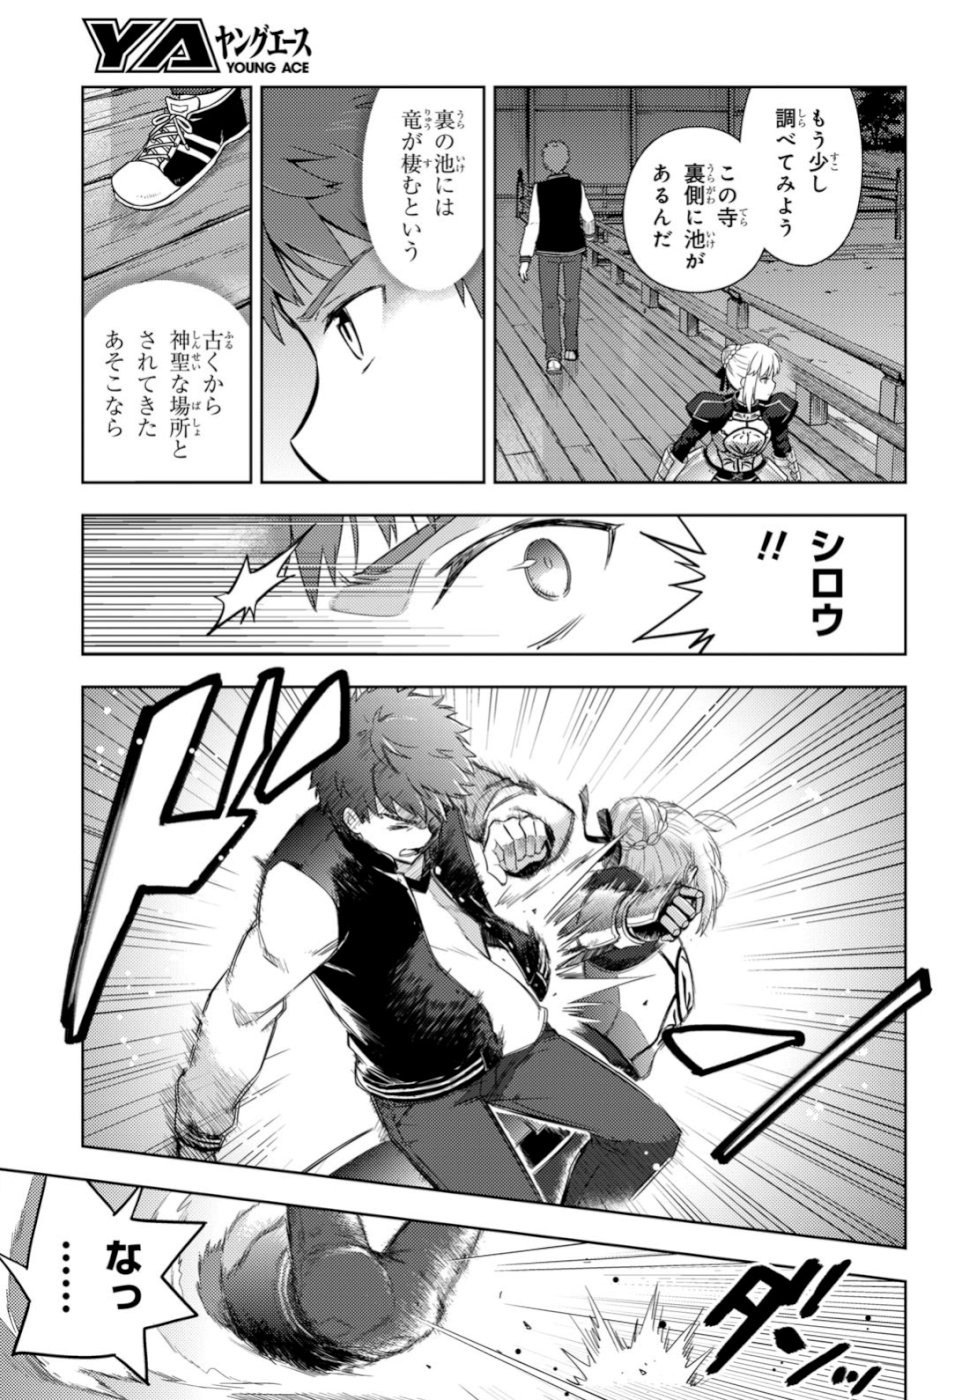 Fate/Stay night Heaven's Feel - Chapter 53 - Page 3